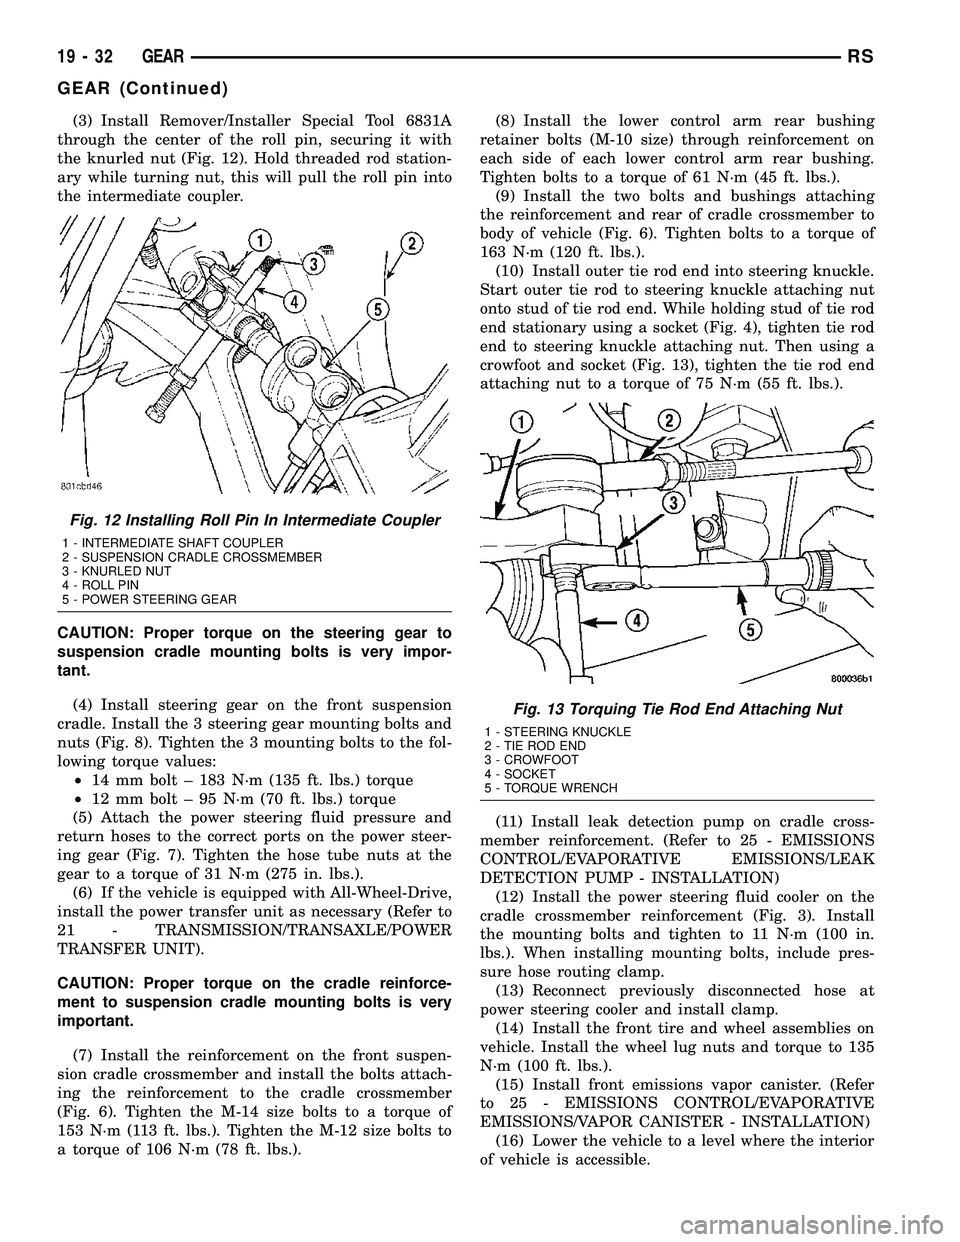 CHRYSLER VOYAGER 2005  Service Manual (3) Install Remover/Installer Special Tool 6831A
through the center of the roll pin, securing it with
the knurled nut (Fig. 12). Hold threaded rod station-
ary while turning nut, this will pull the ro